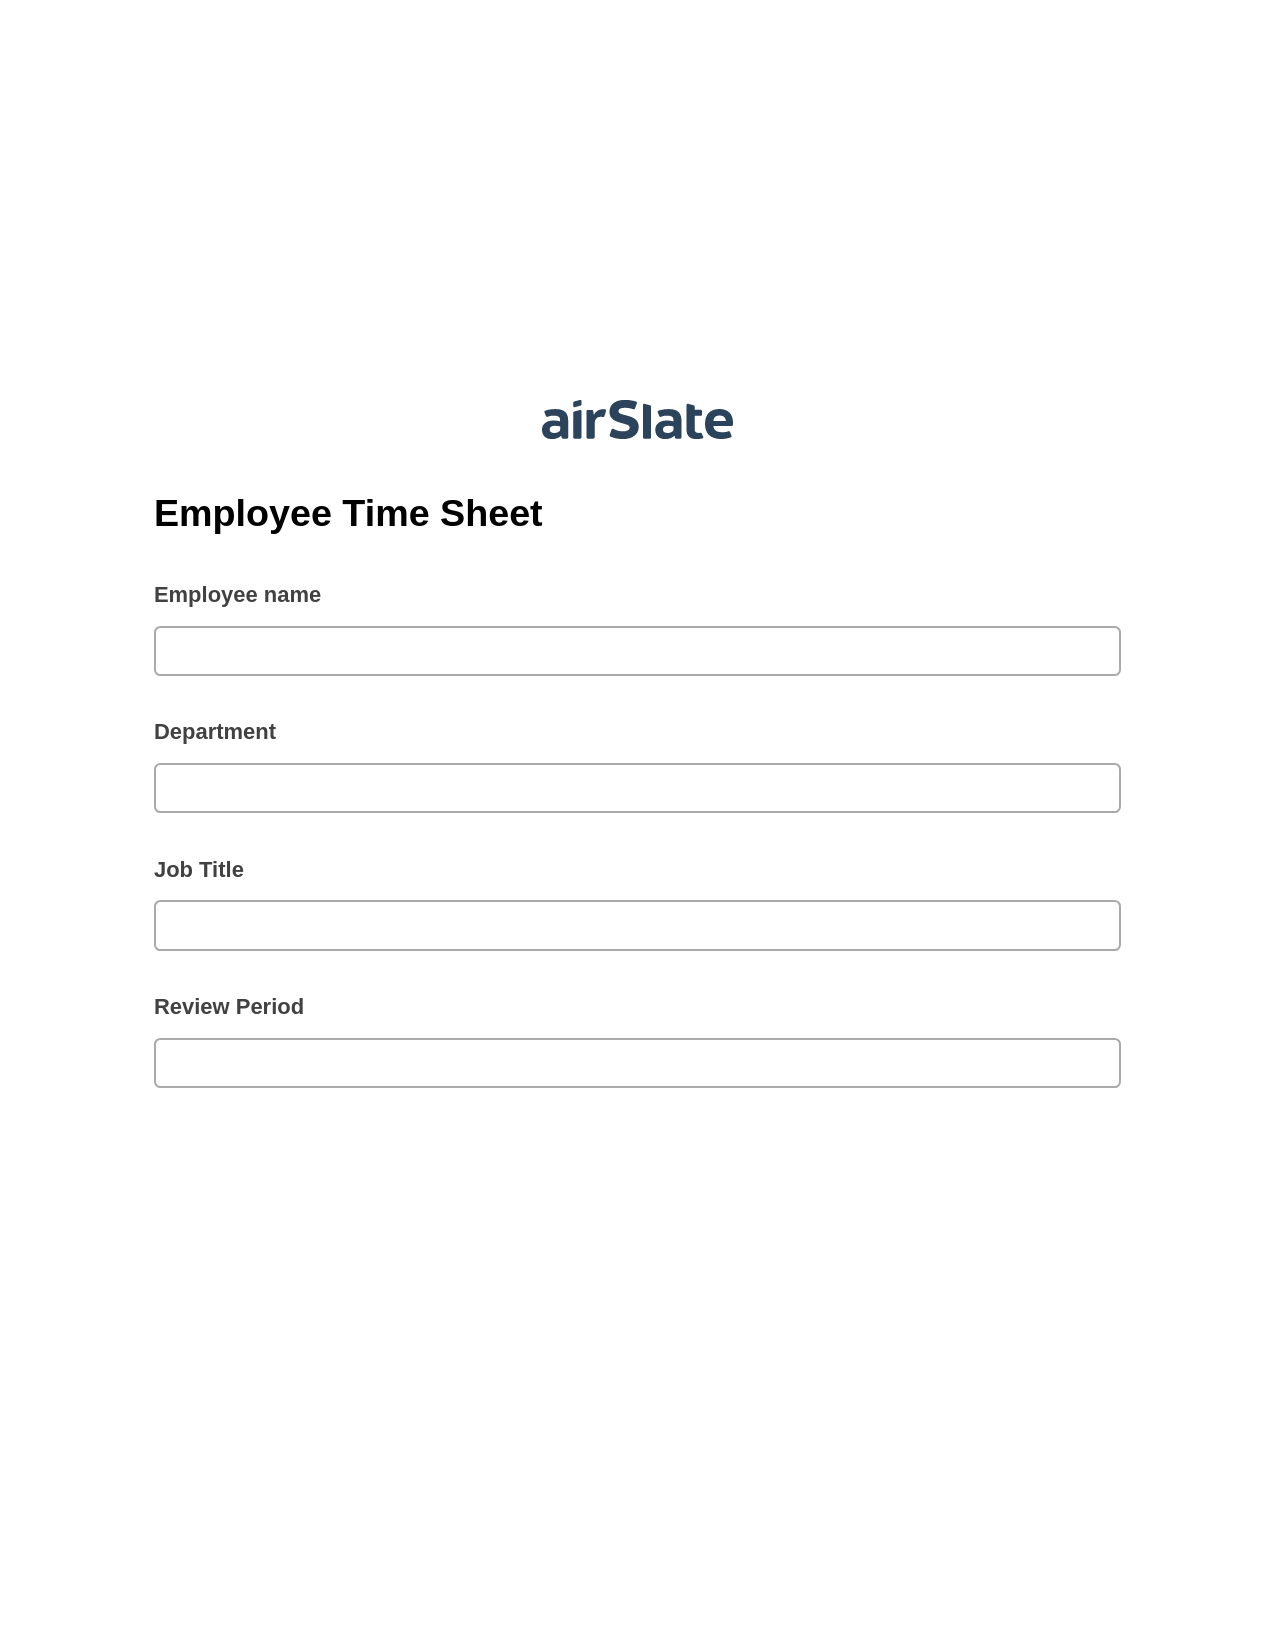 Employee Time Sheet Pre-fill Document Bot, Update Audit Trail Bot, Archive to Box Bot